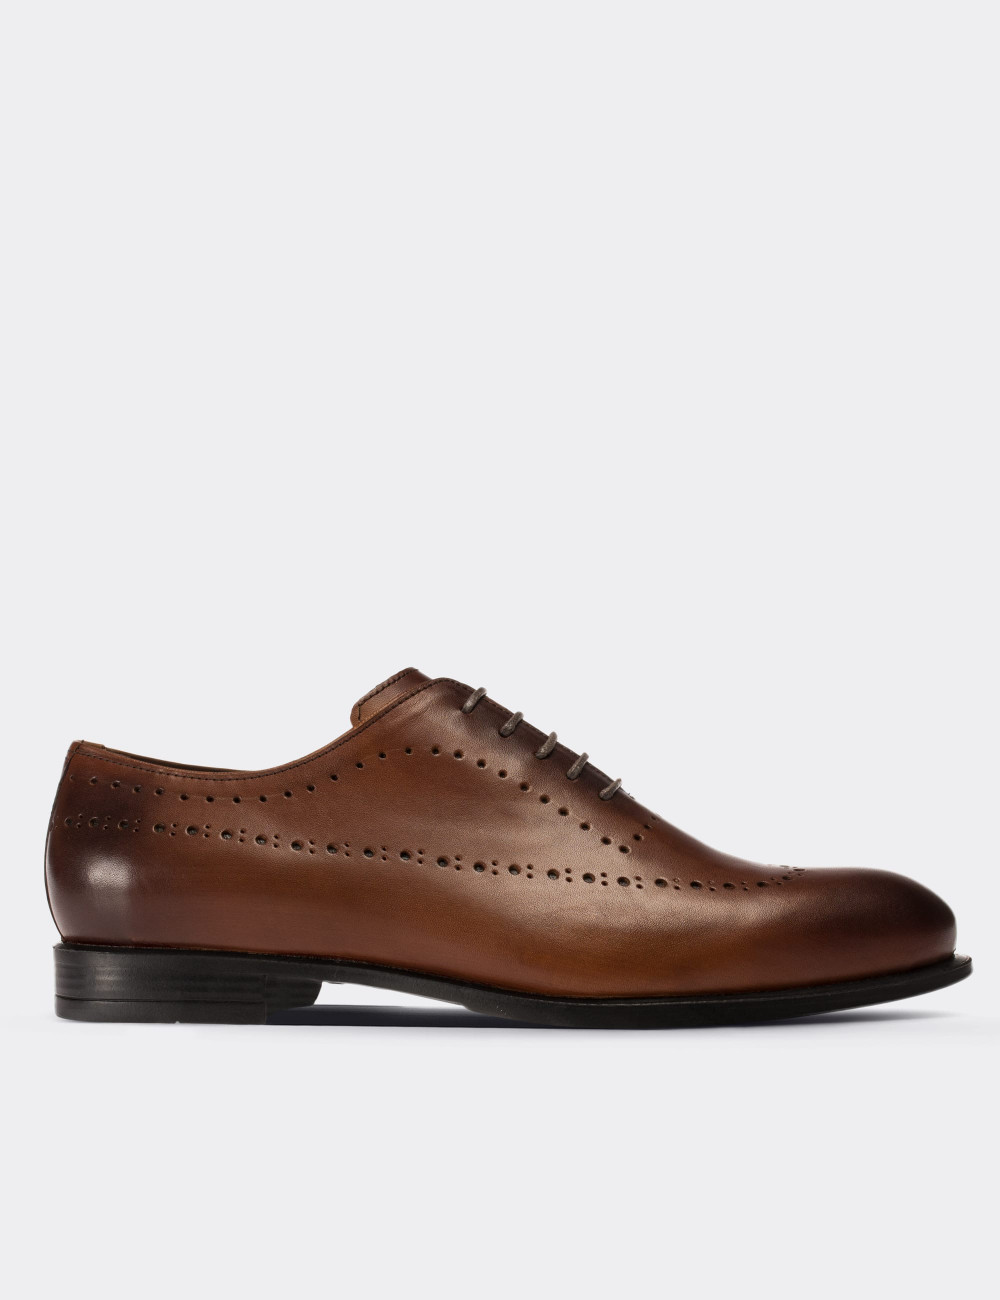 Tan Leather Classic Shoes - Deery